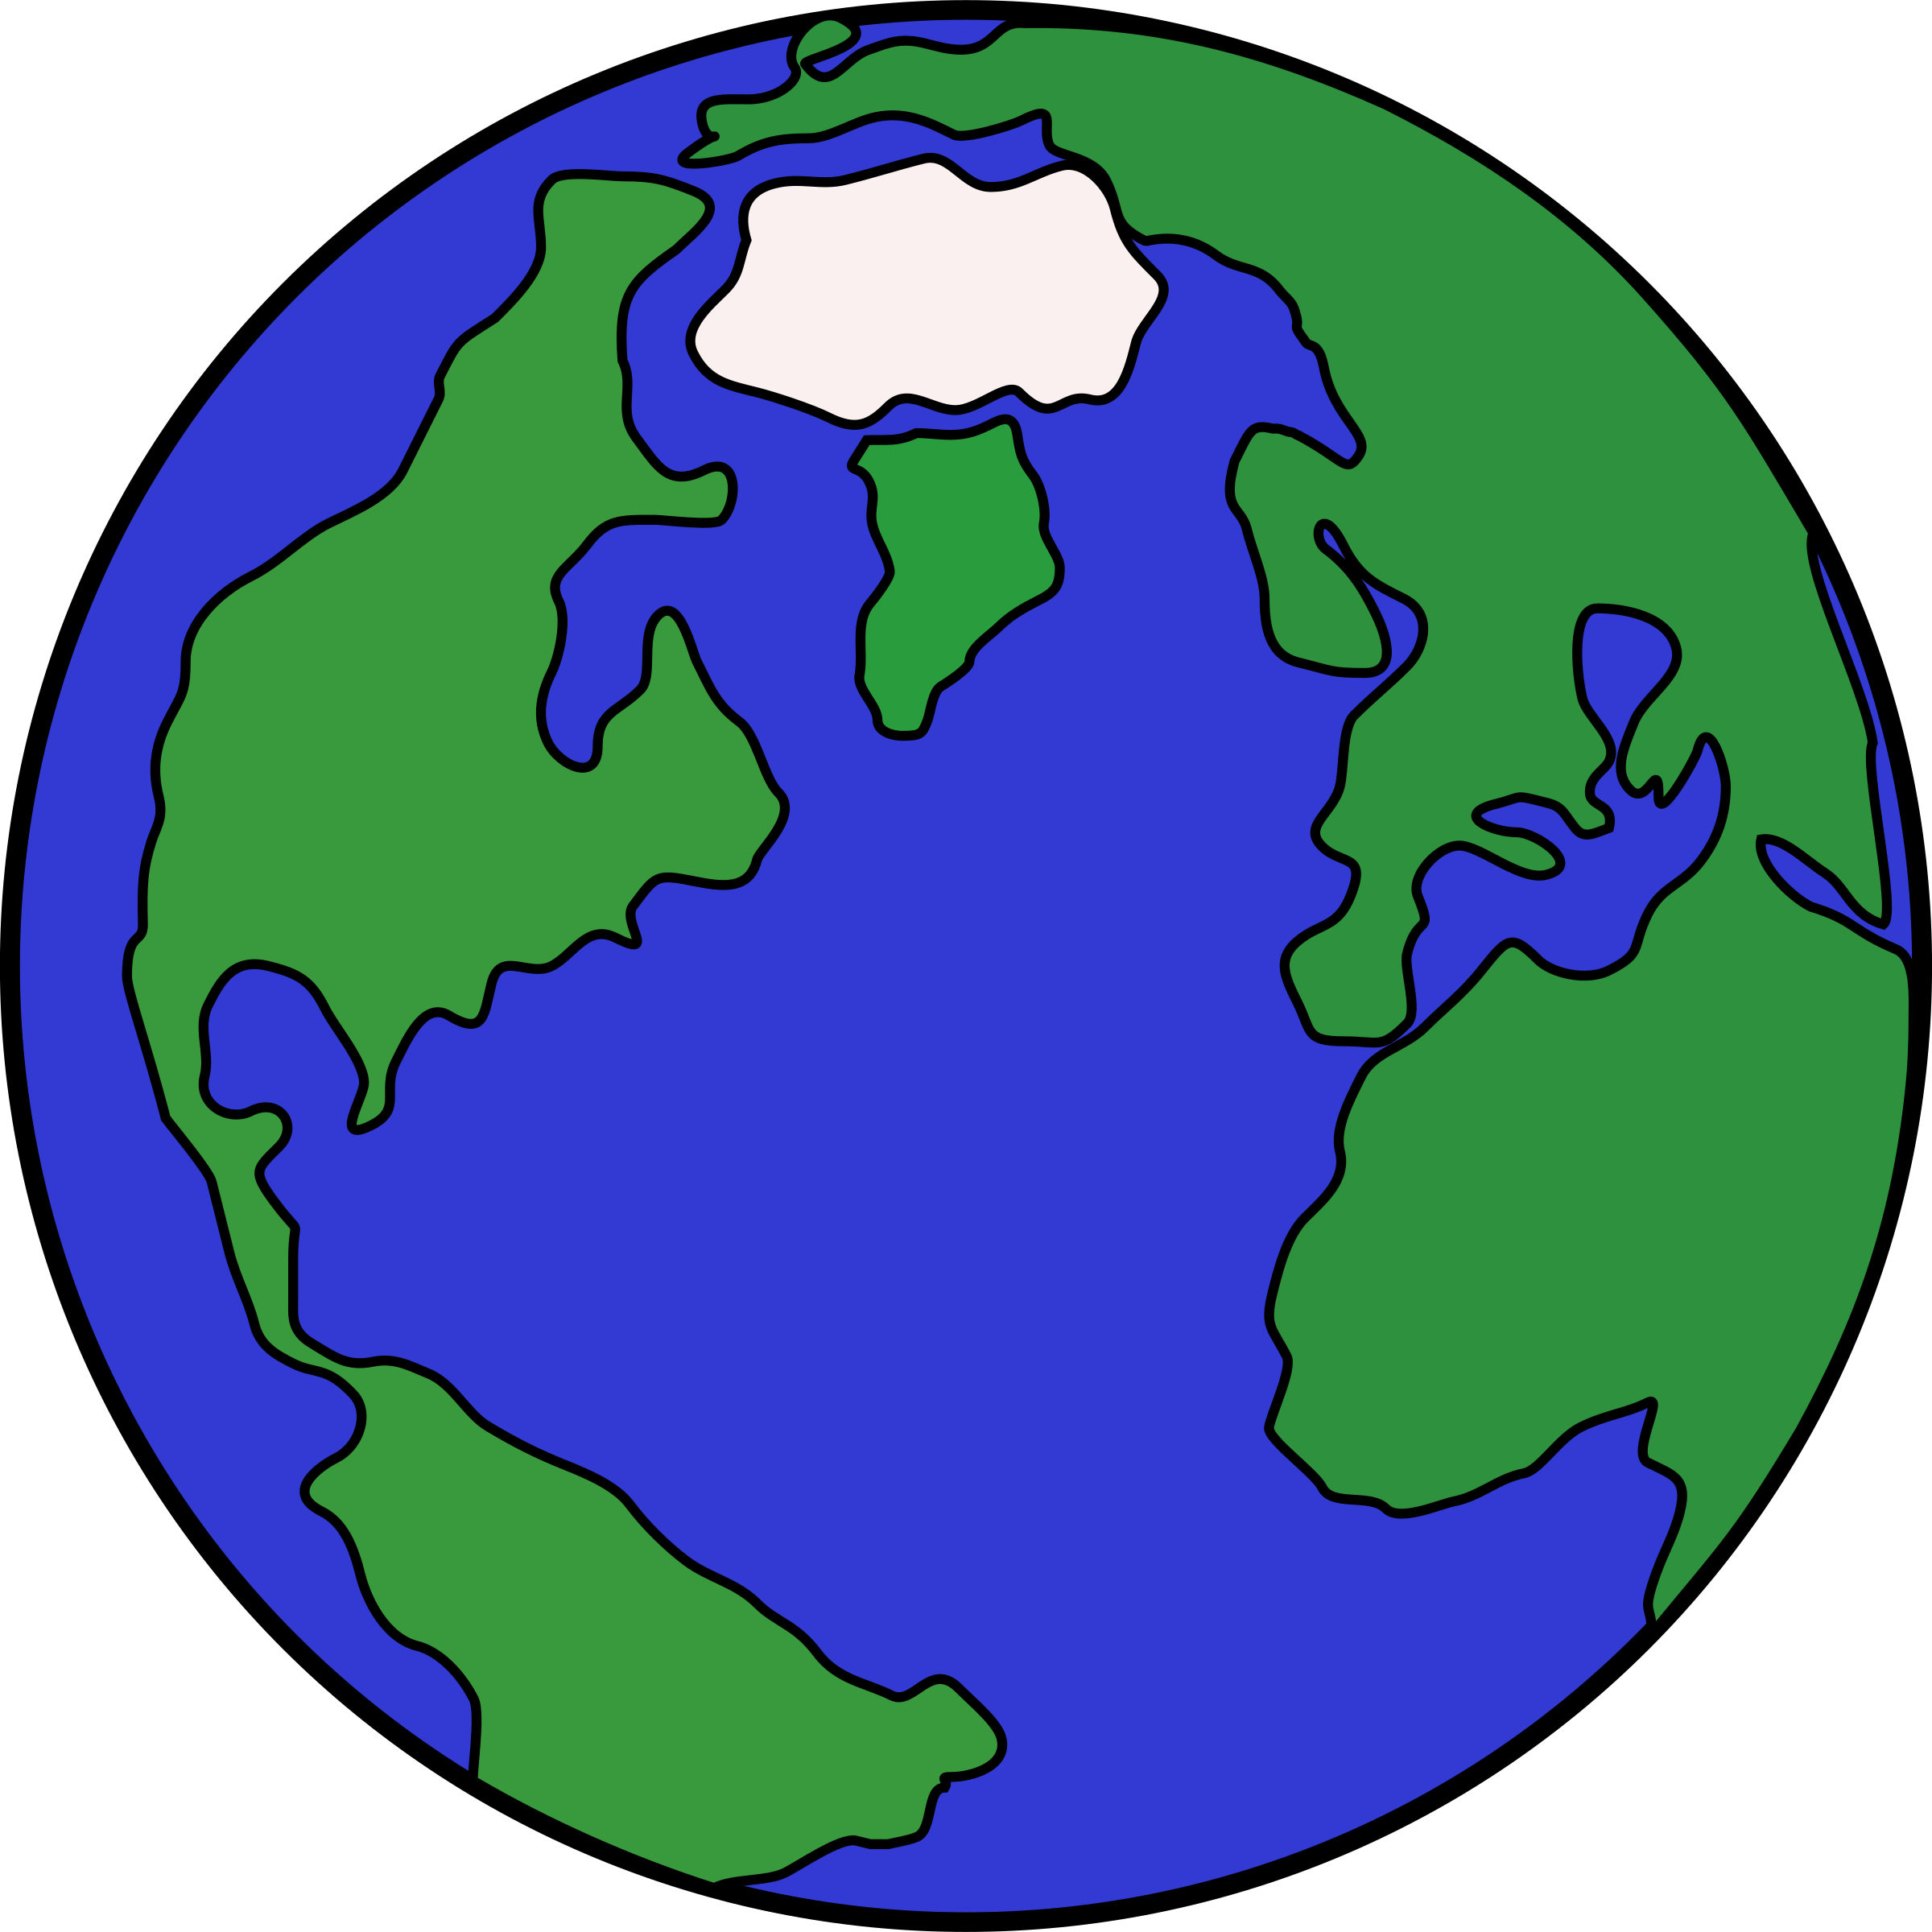 free clipart planet earth - photo #36